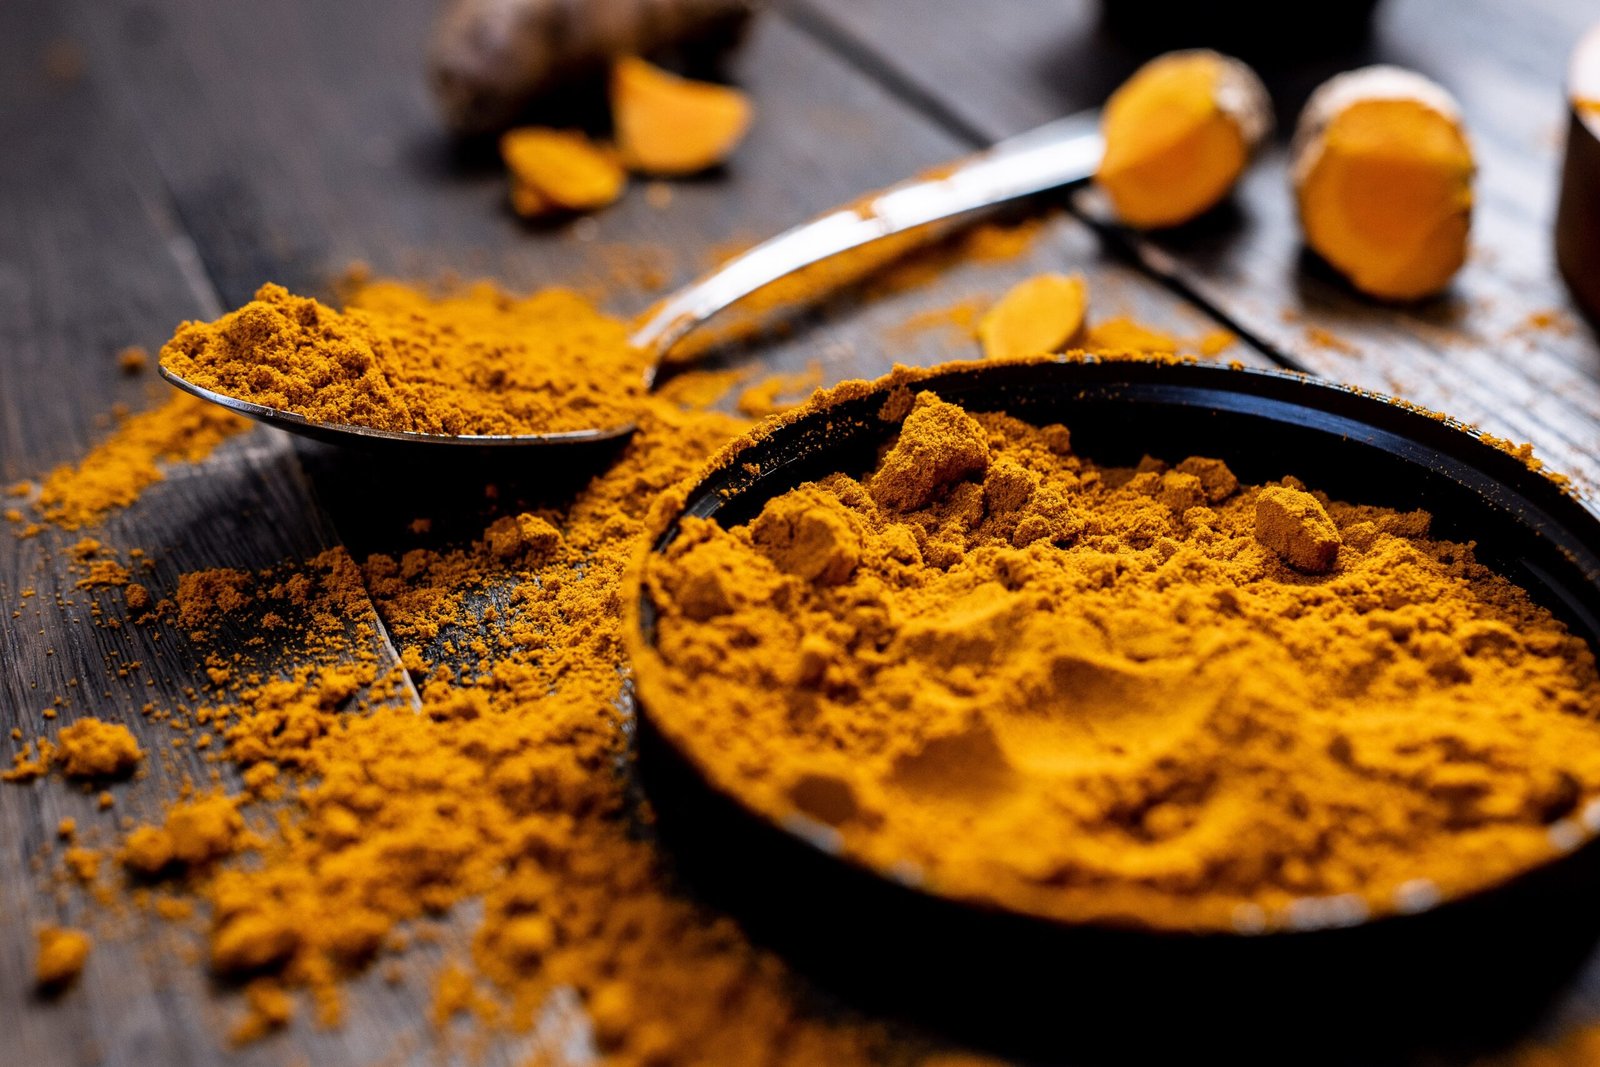 How to Make Turmeric Milk for Detox – A Step-By-Step Guide